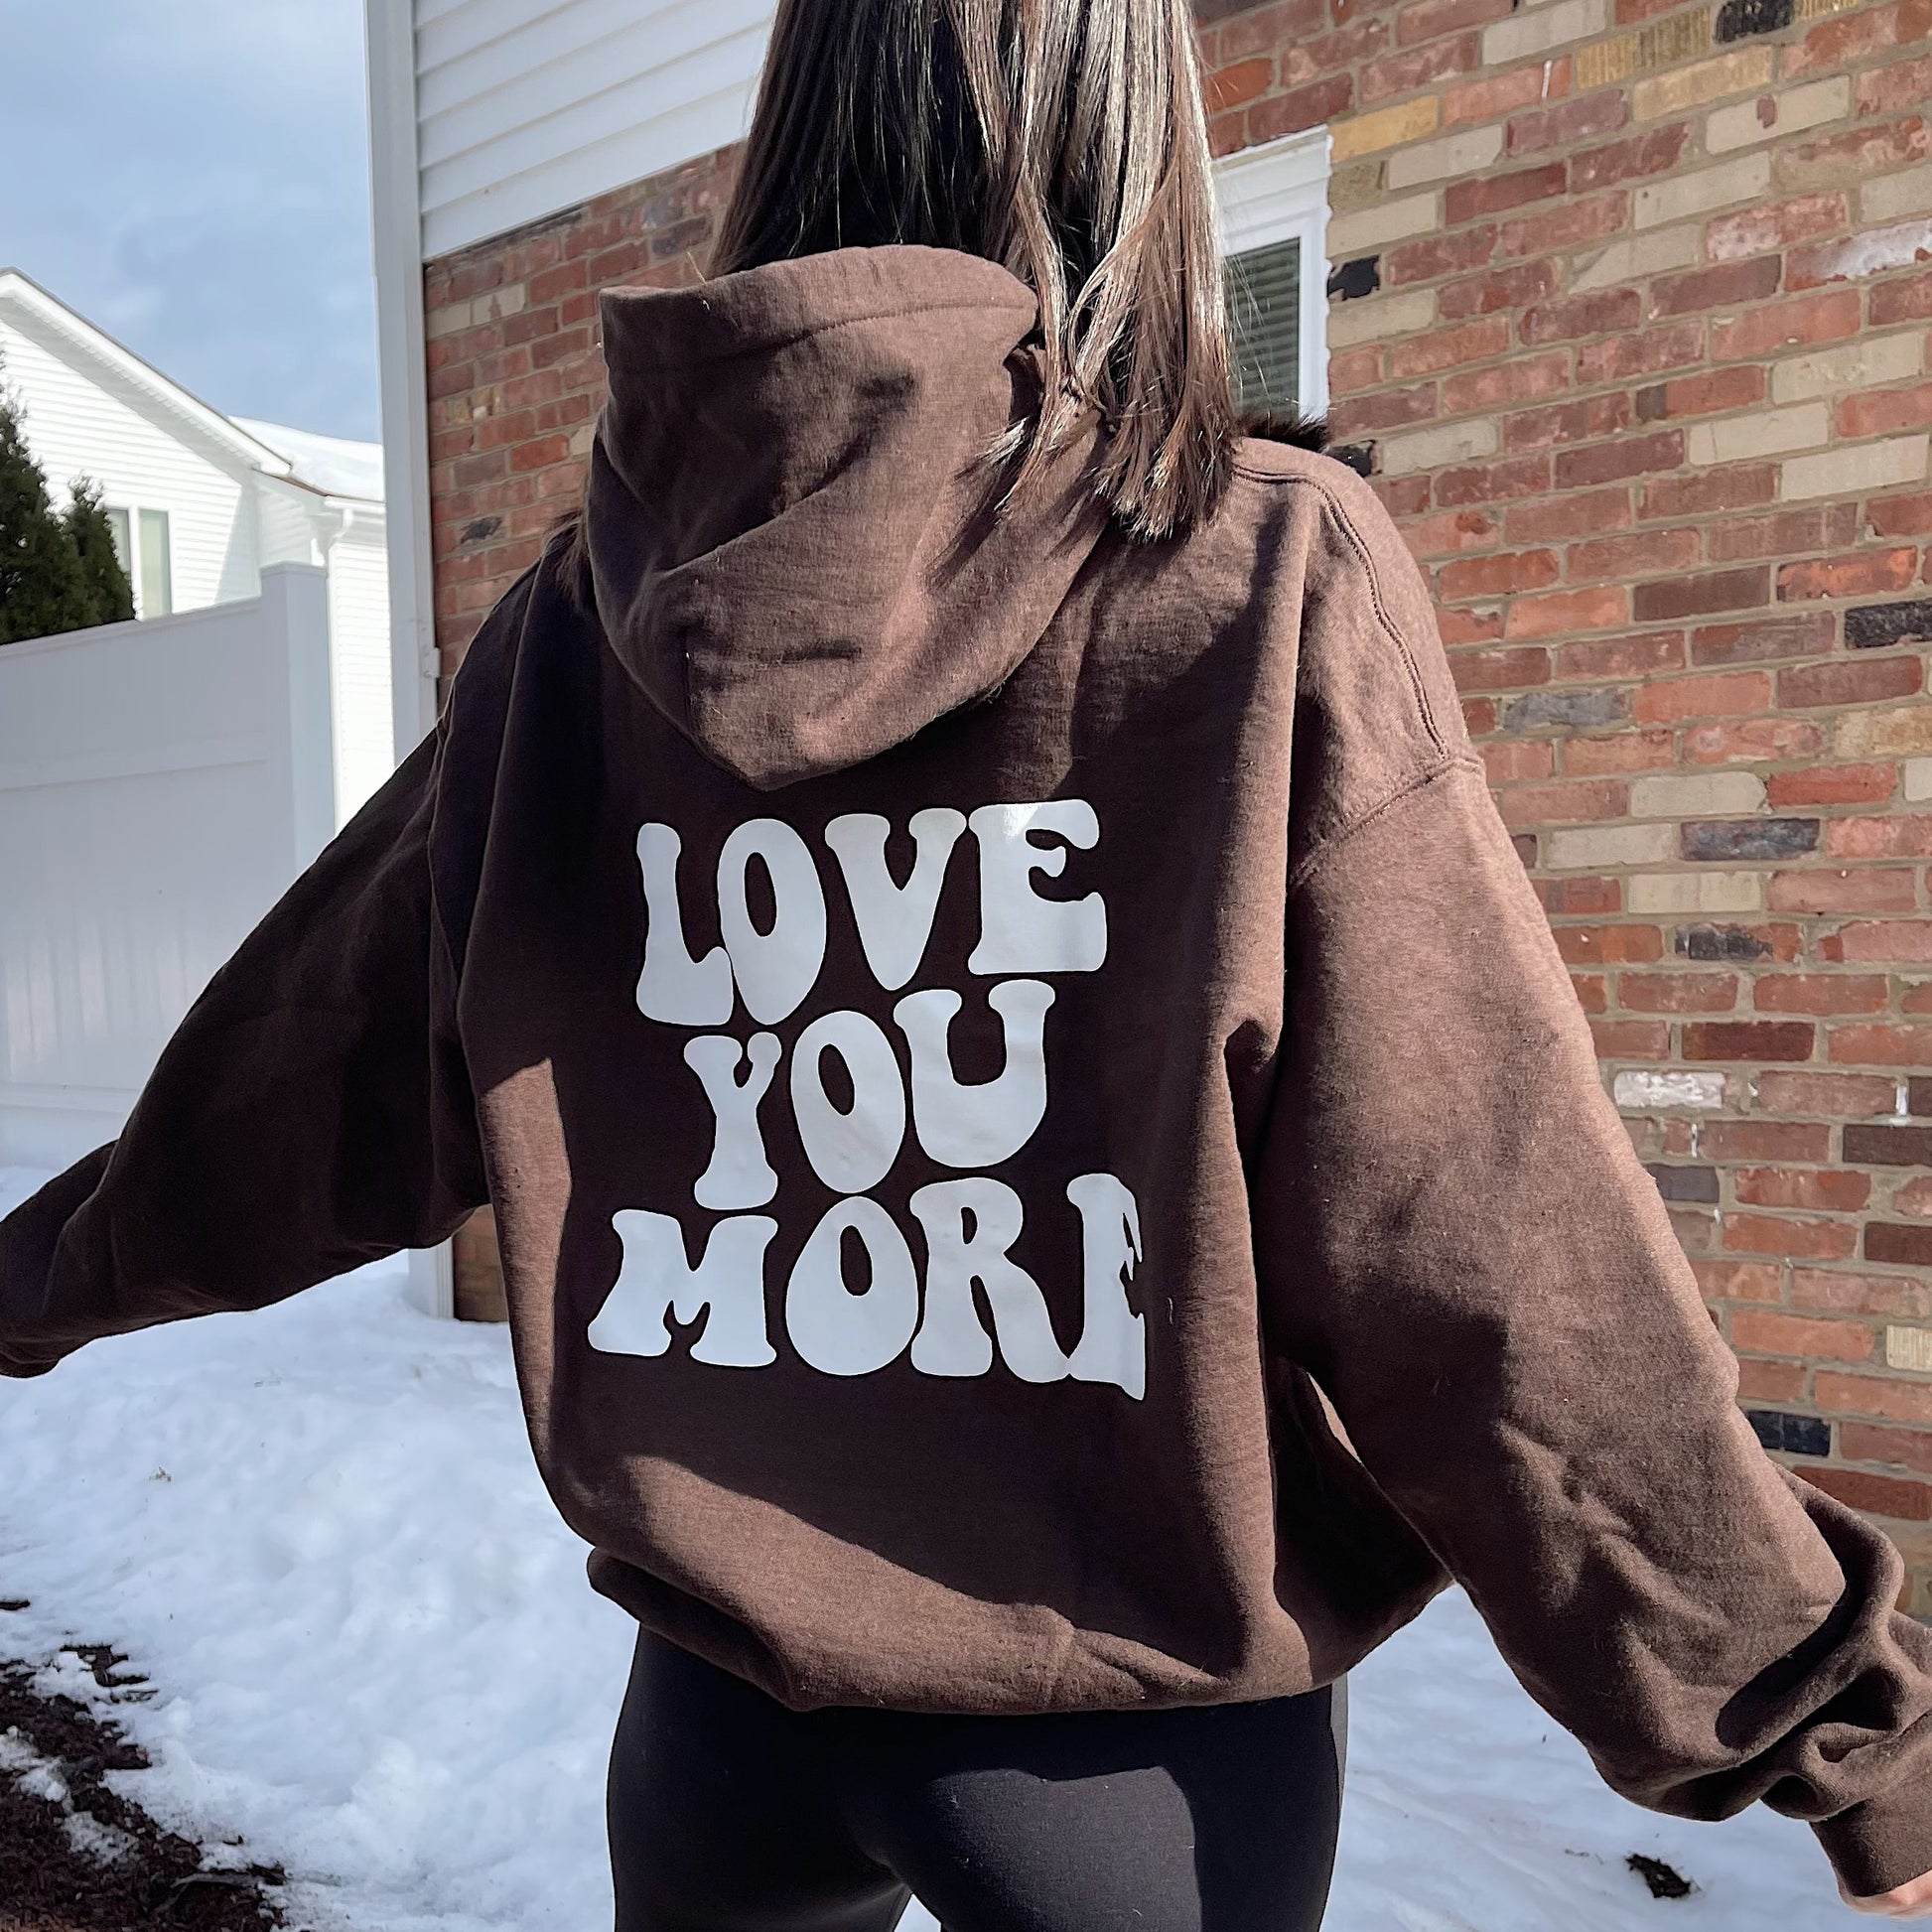 Love with you' Hoodie